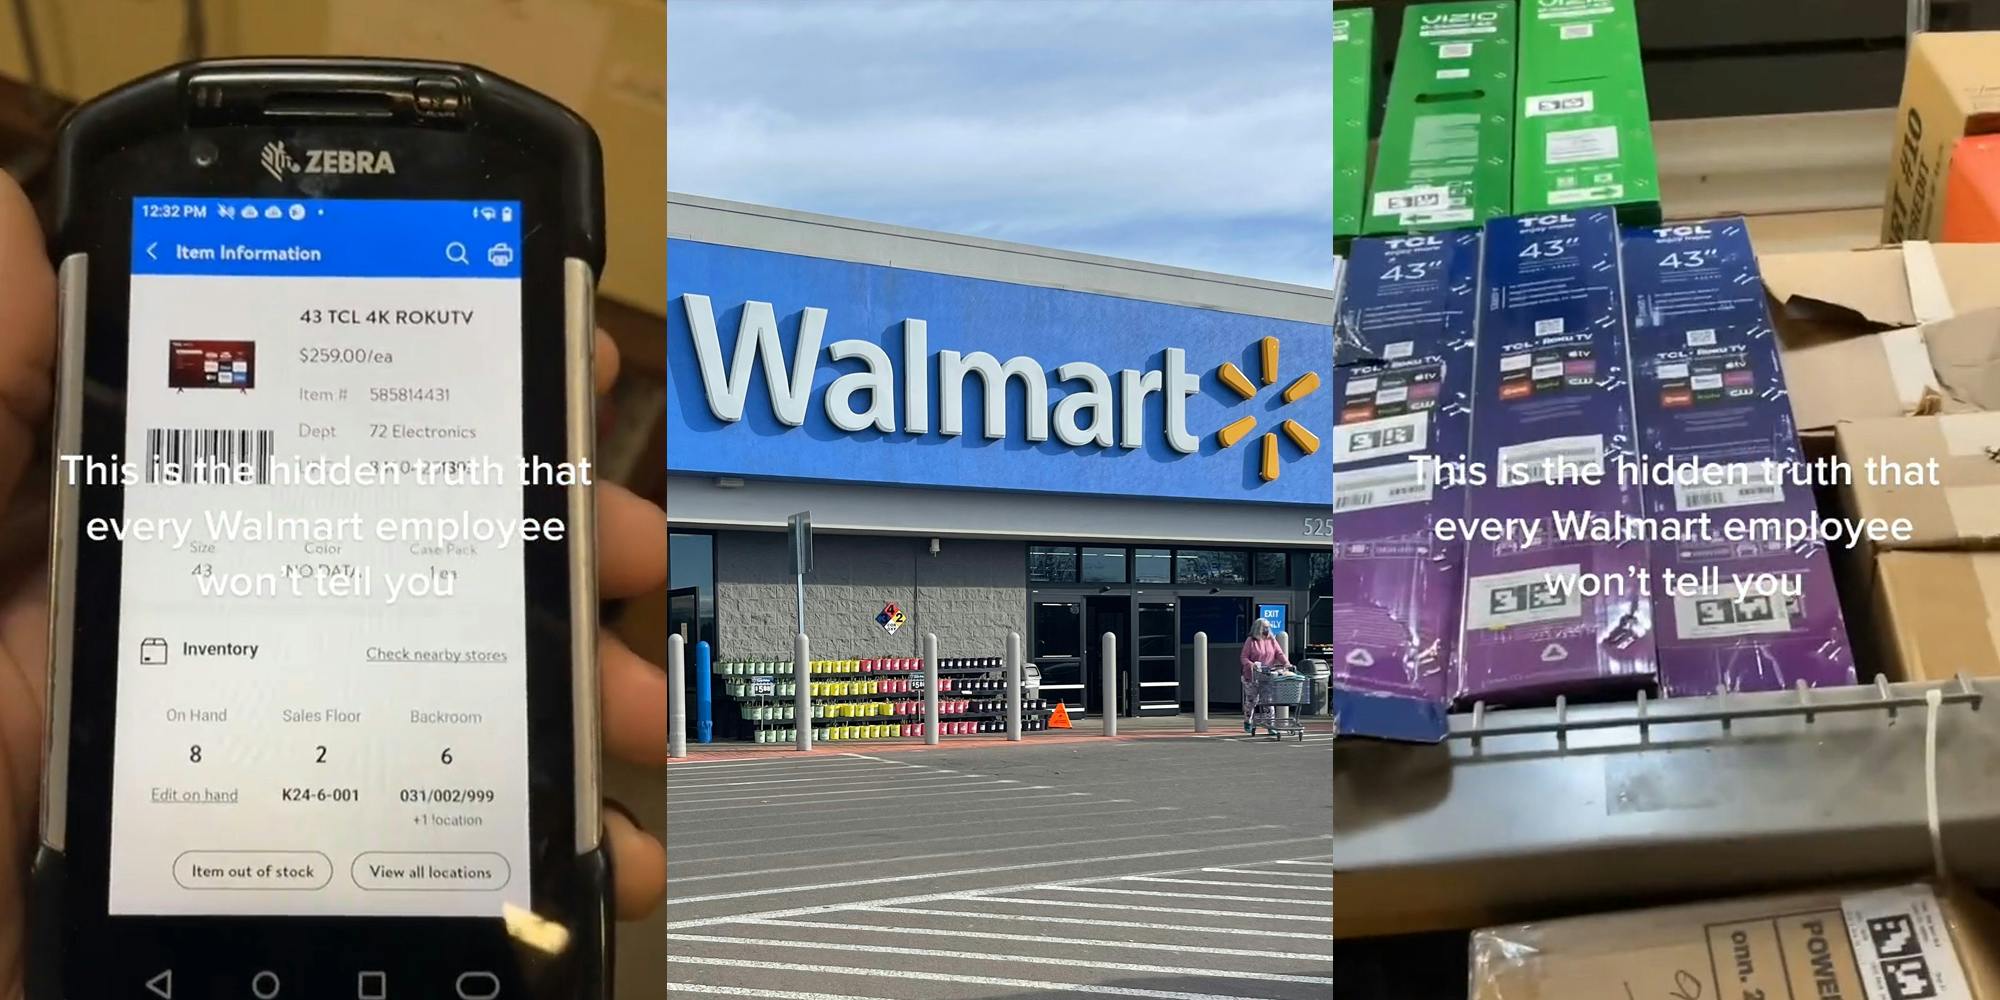 Zebra scanner in Walmart employee's hand with caption "This is the hidden truth that every Walmart employee won't tell you" (l) Walmart entrance with sign (c) Walmart TVs stacked high on shelf with caption "This is the hidden truth that every Walmart employee won't tell you" (r)